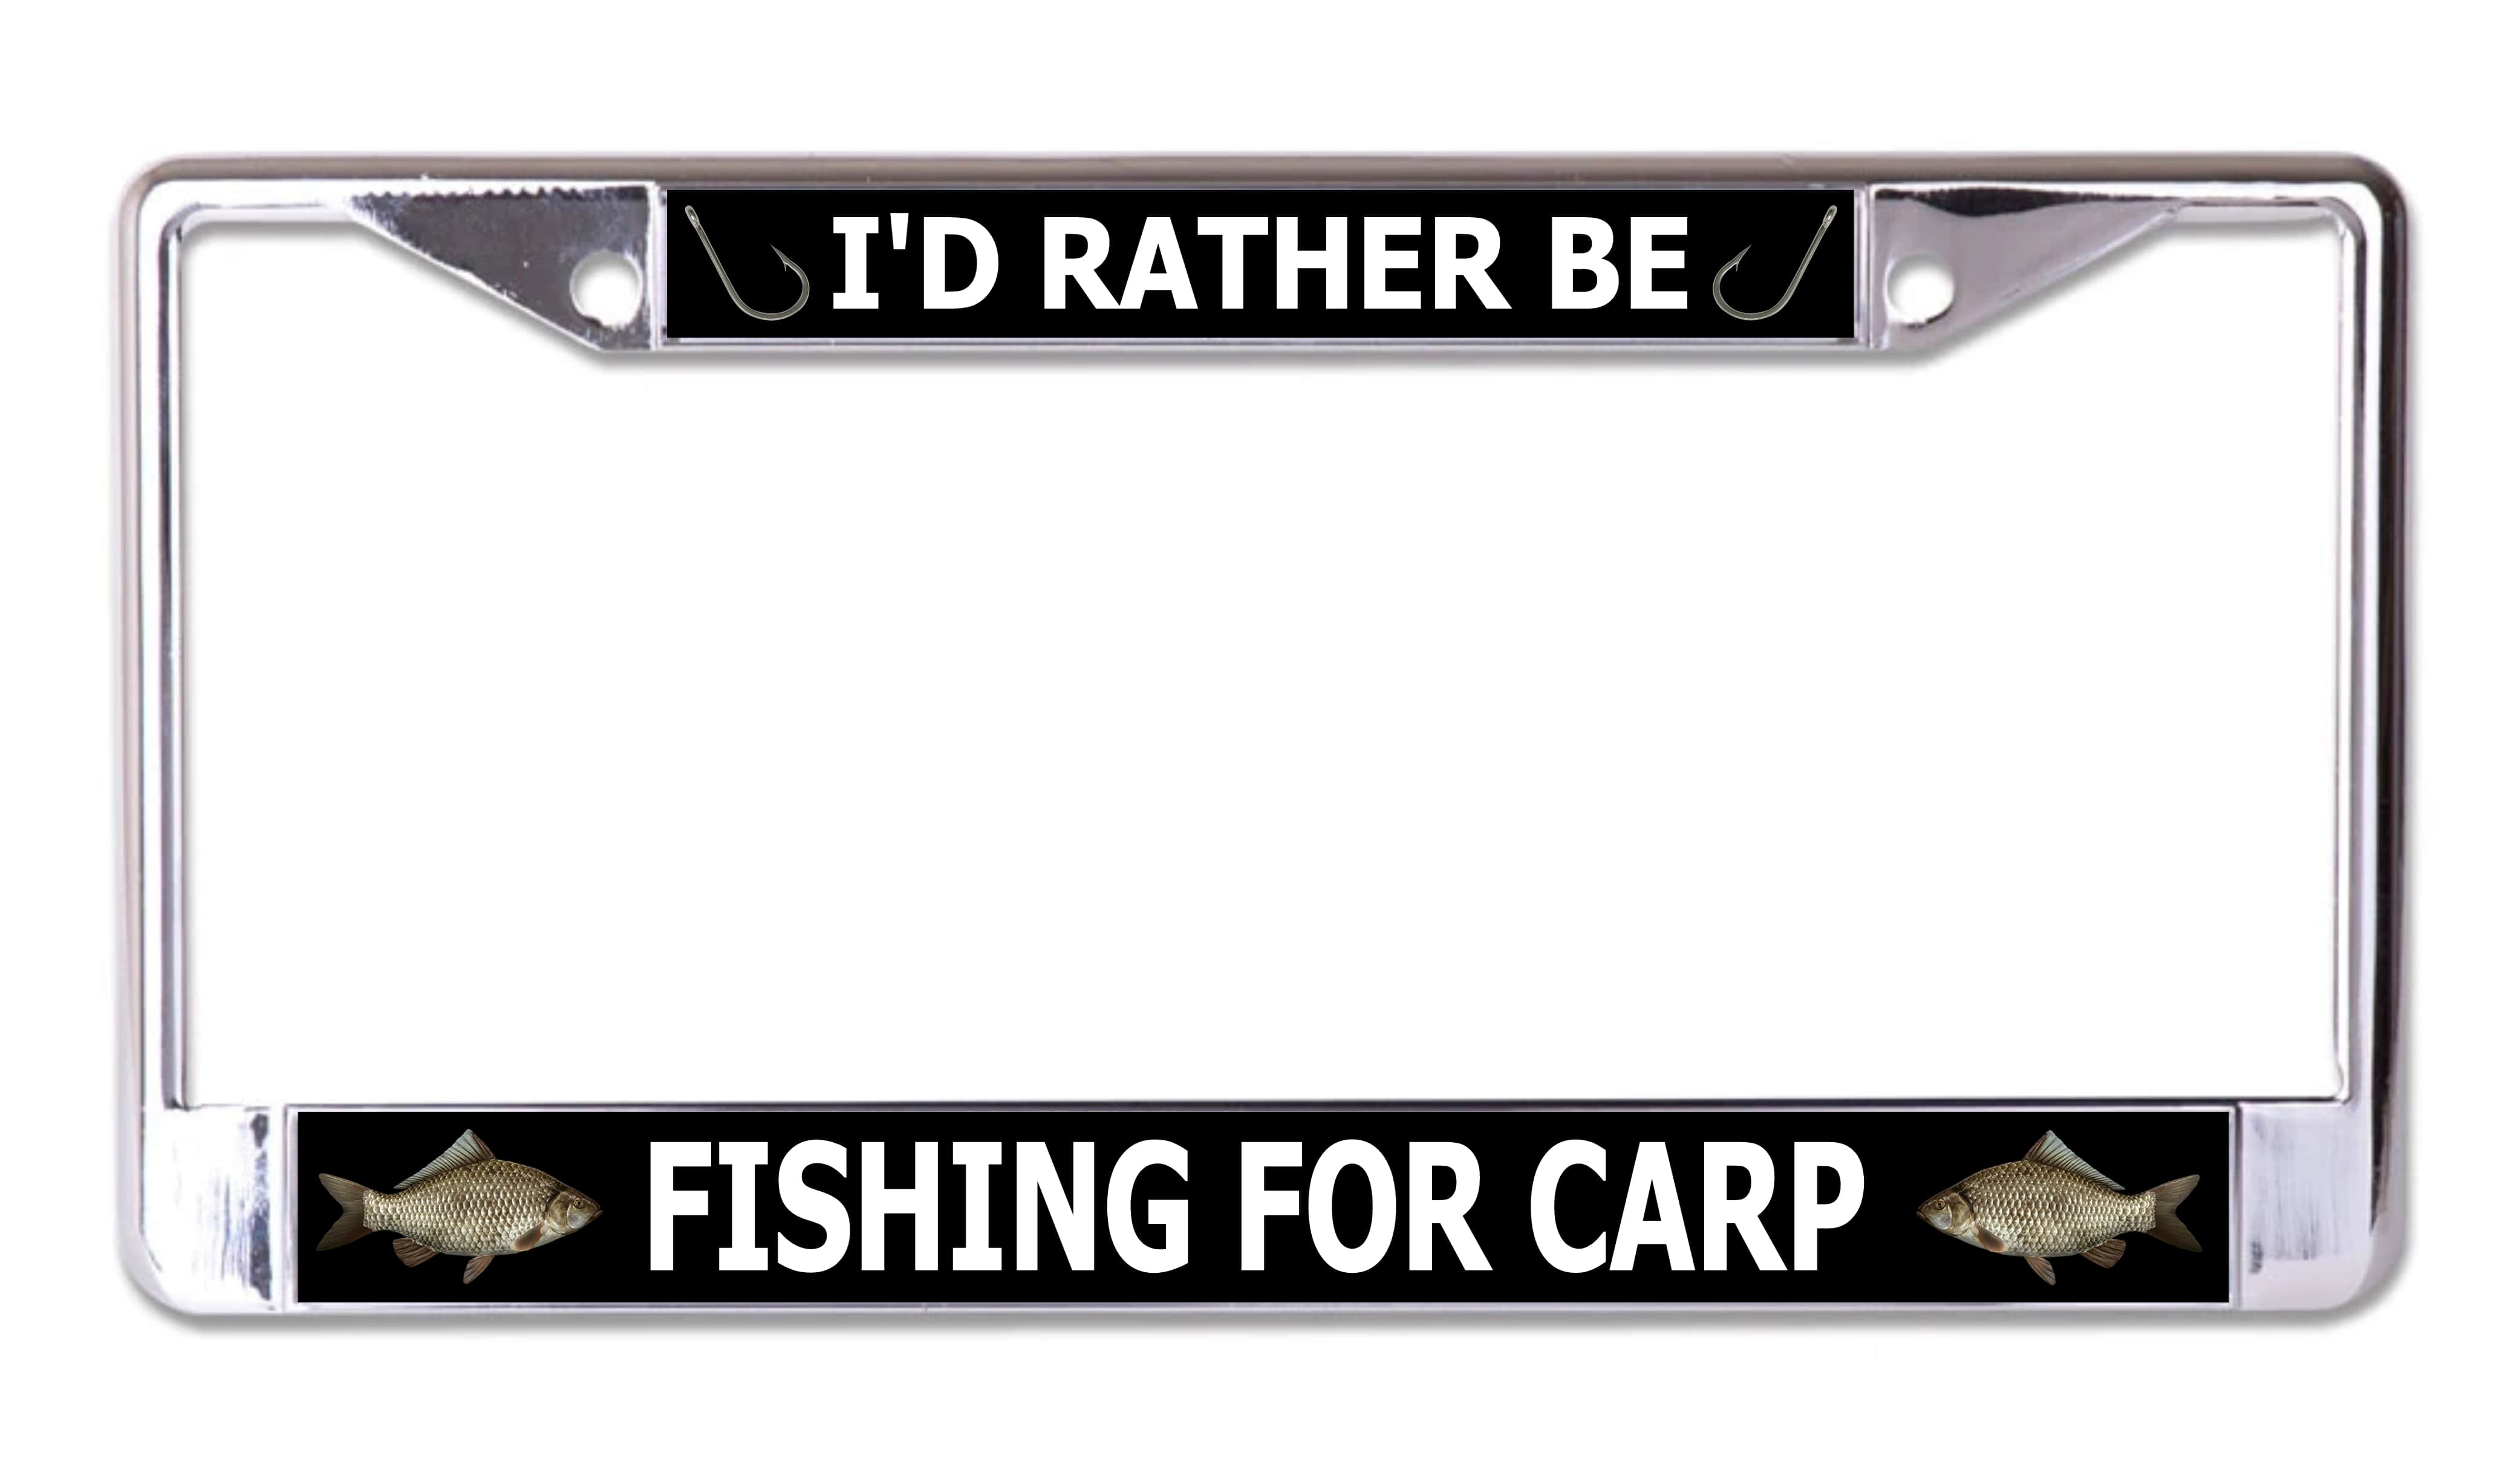 212 Main Lpo7184 6 x 12 in. ID Rather Be Fishing for Carp Chrome License Plate Frame